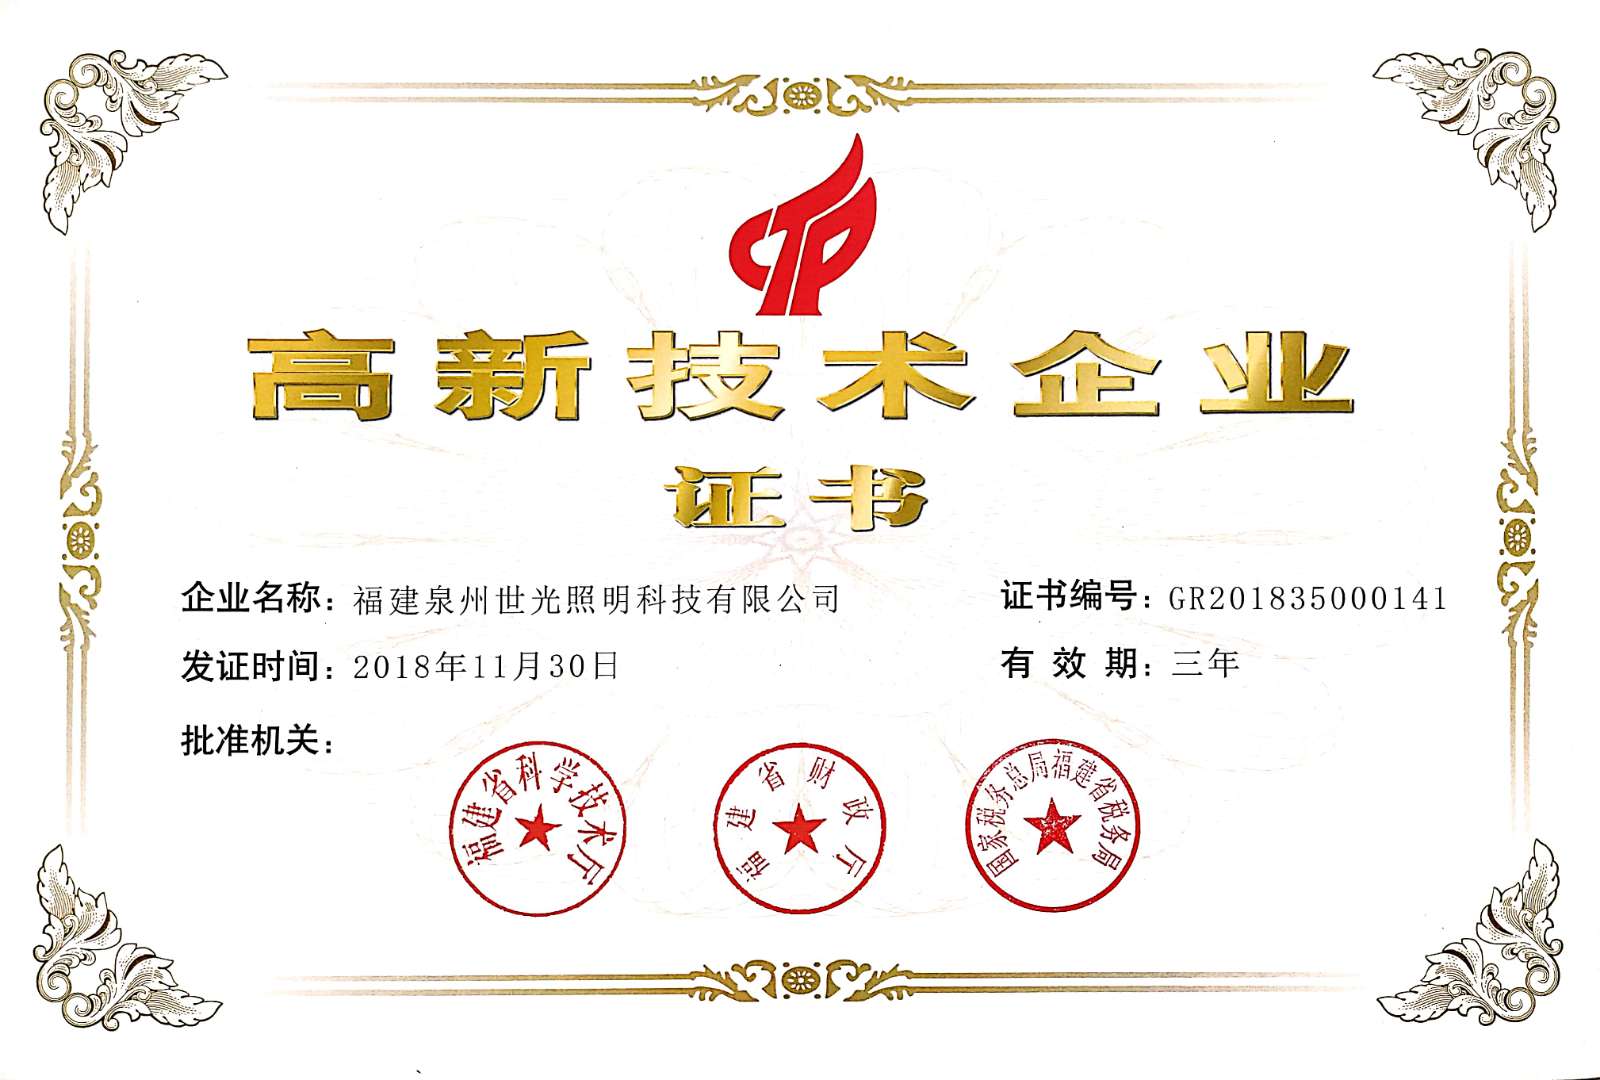 SIGOLED is recognized as a national high-tech enterprise